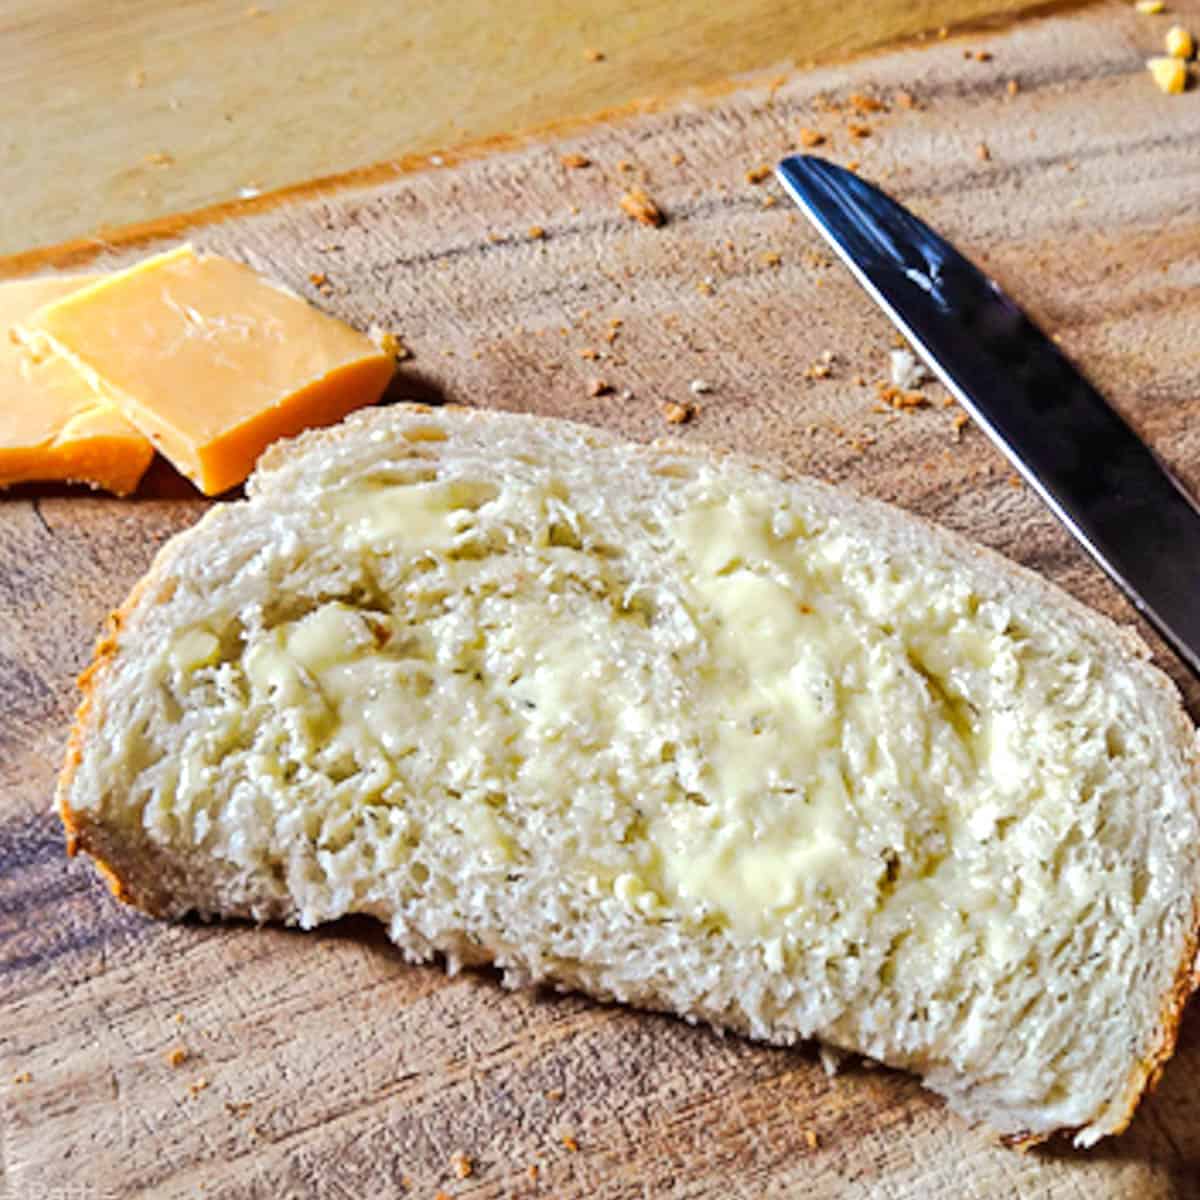 Dill & Onion Bread buttered with cheese